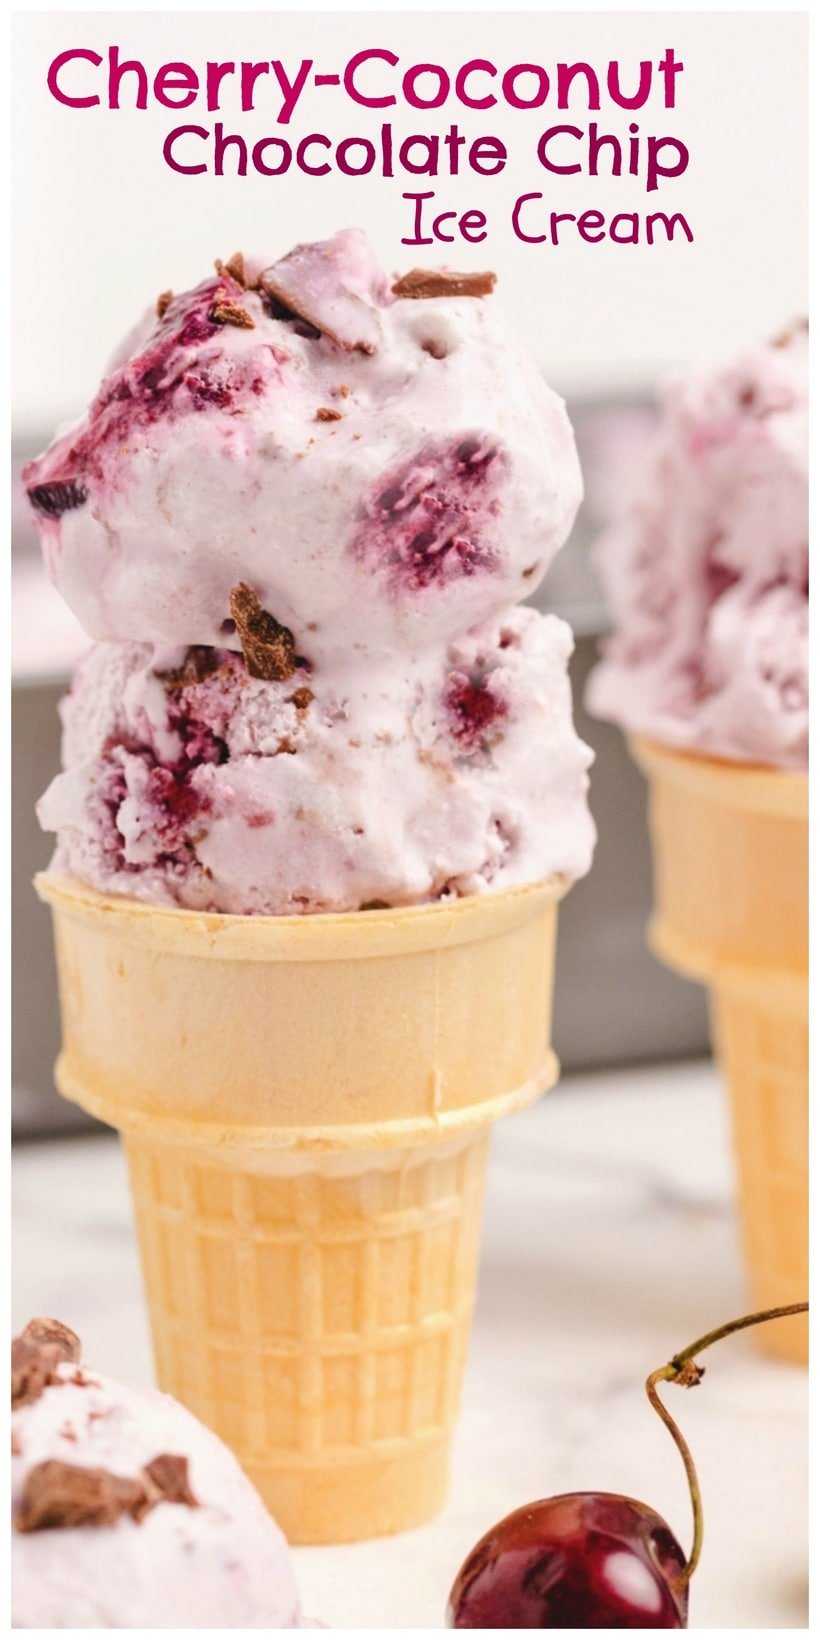 Coconut-Cherry Chocolate Chip Ice Cream is a no-custard required homemade ice cream packed with fresh cherries and chunks of chocolate. It is absolutely the best cherry season treat. via @cmpollak1